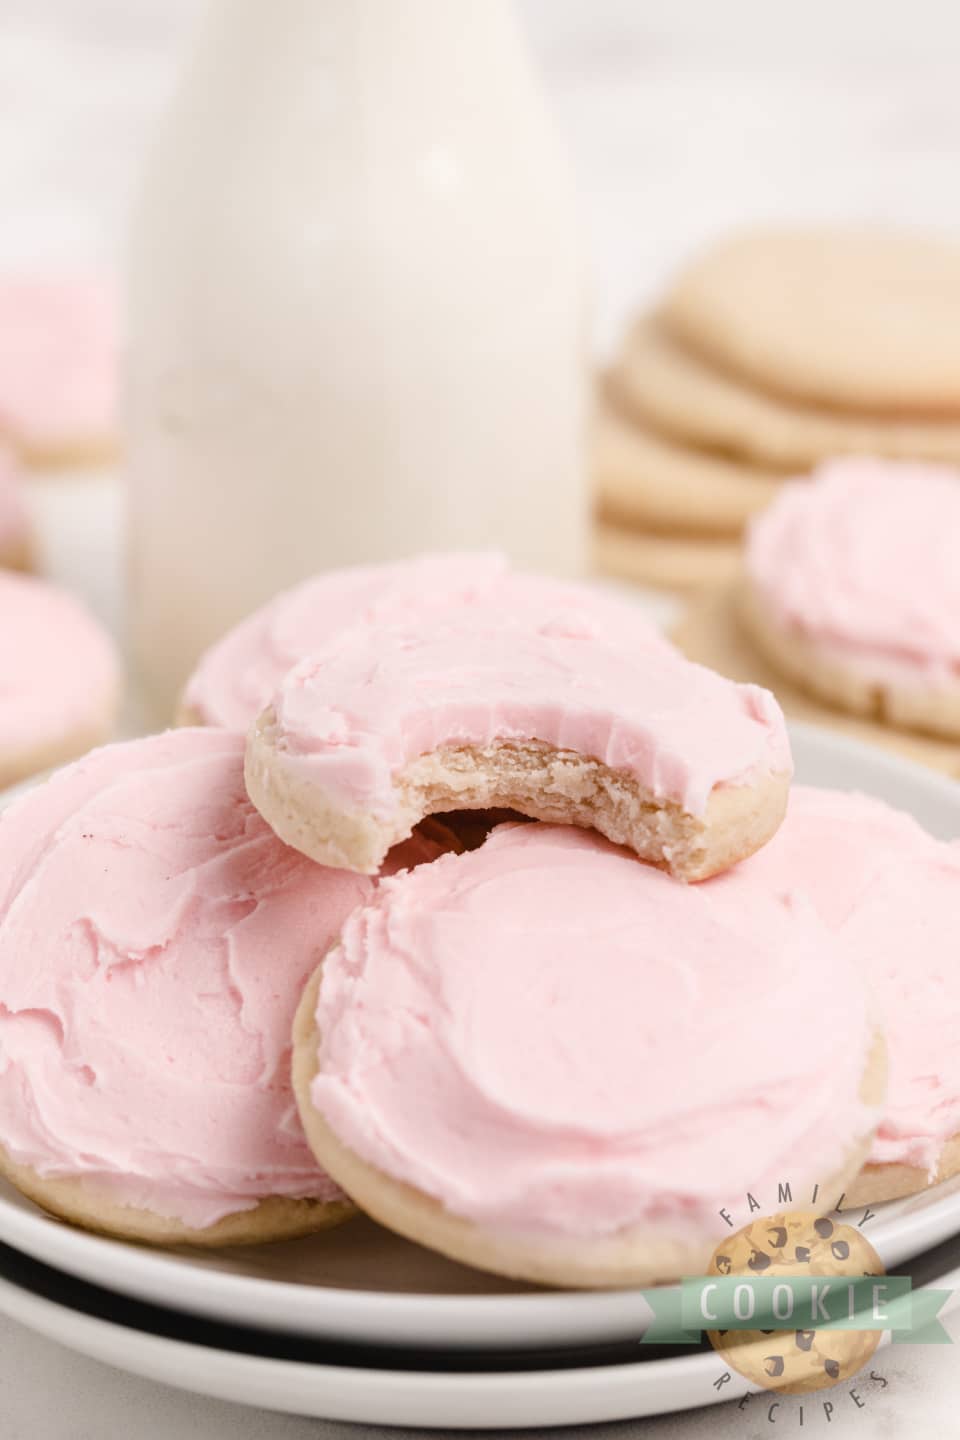 Cream Cheese Sugar Cookies are soft, thick and easily the best sugar cookie recipe I've ever tried. These sugar cookies hold their shape when baked and they are moist and perfectly sweet too!